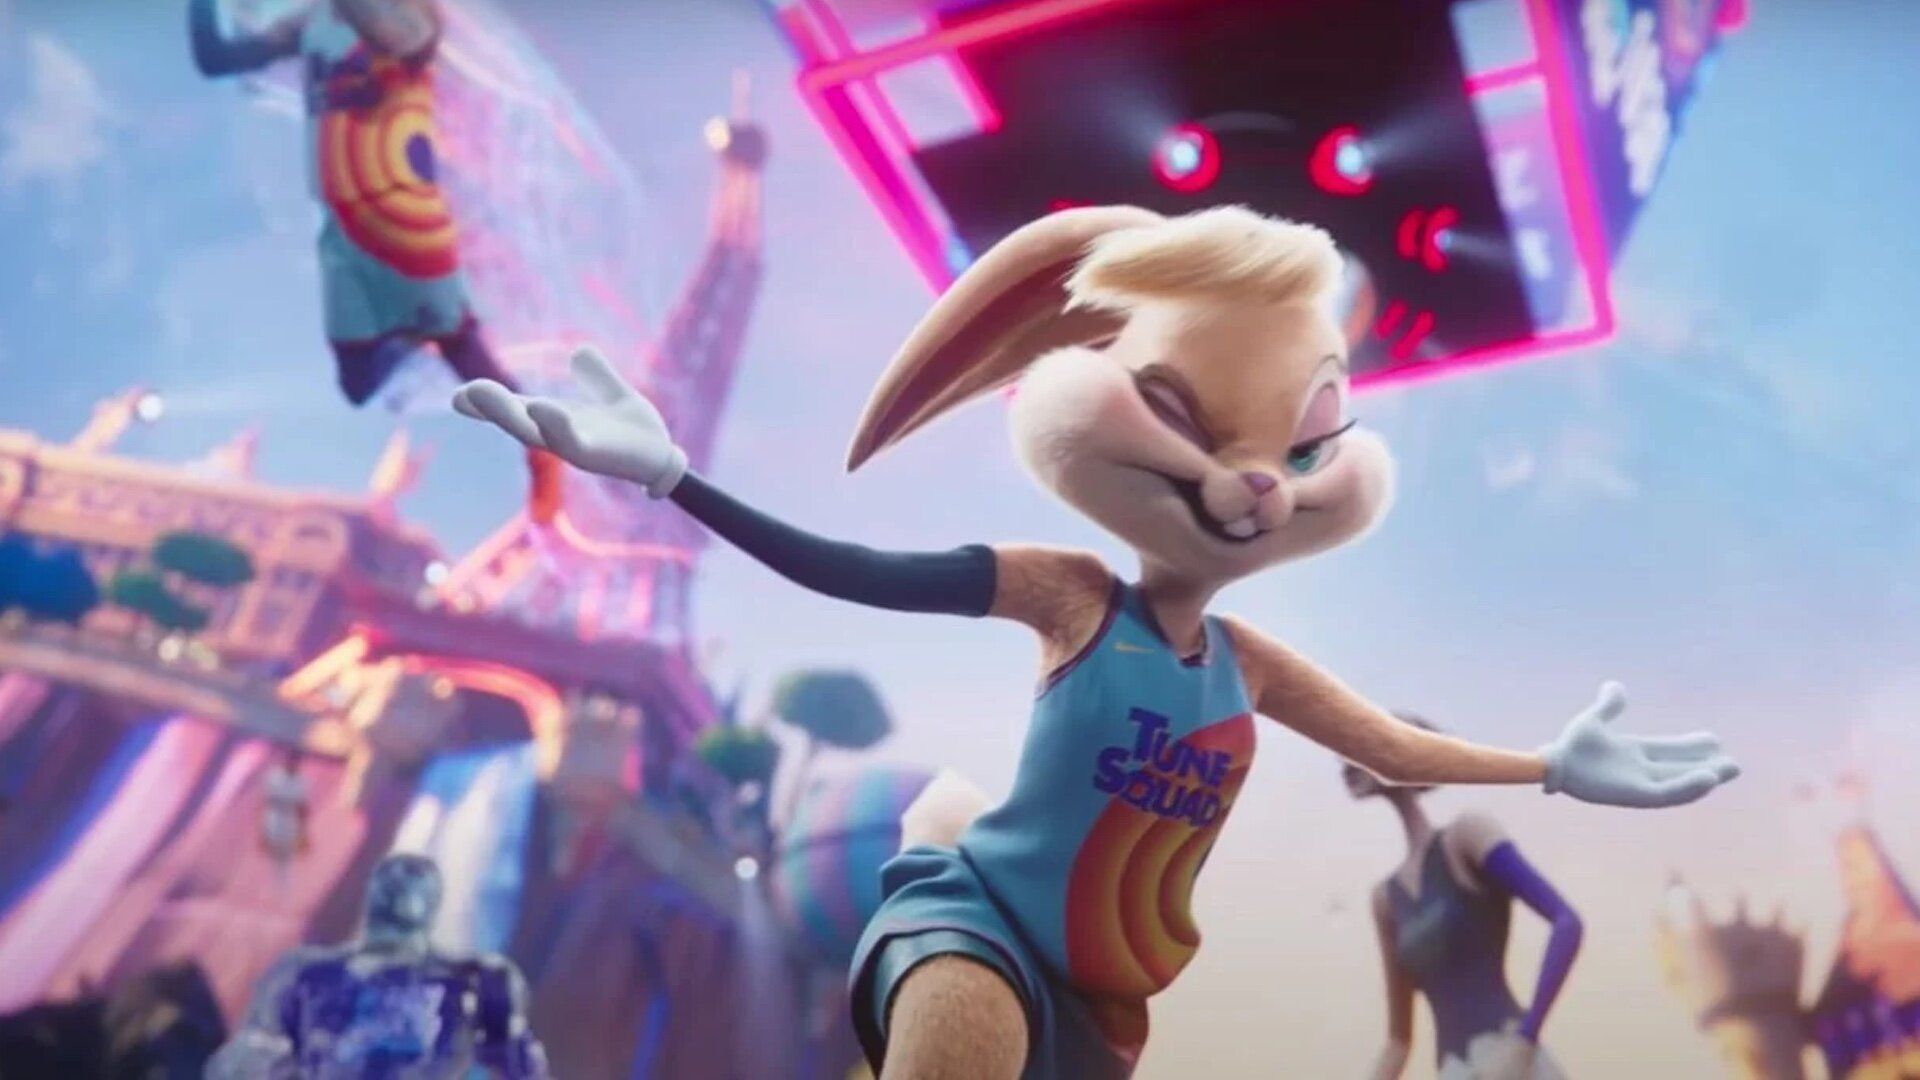 Zendaya Voicing Lola Bunny in SPACE JAM: A NEW LEGACY